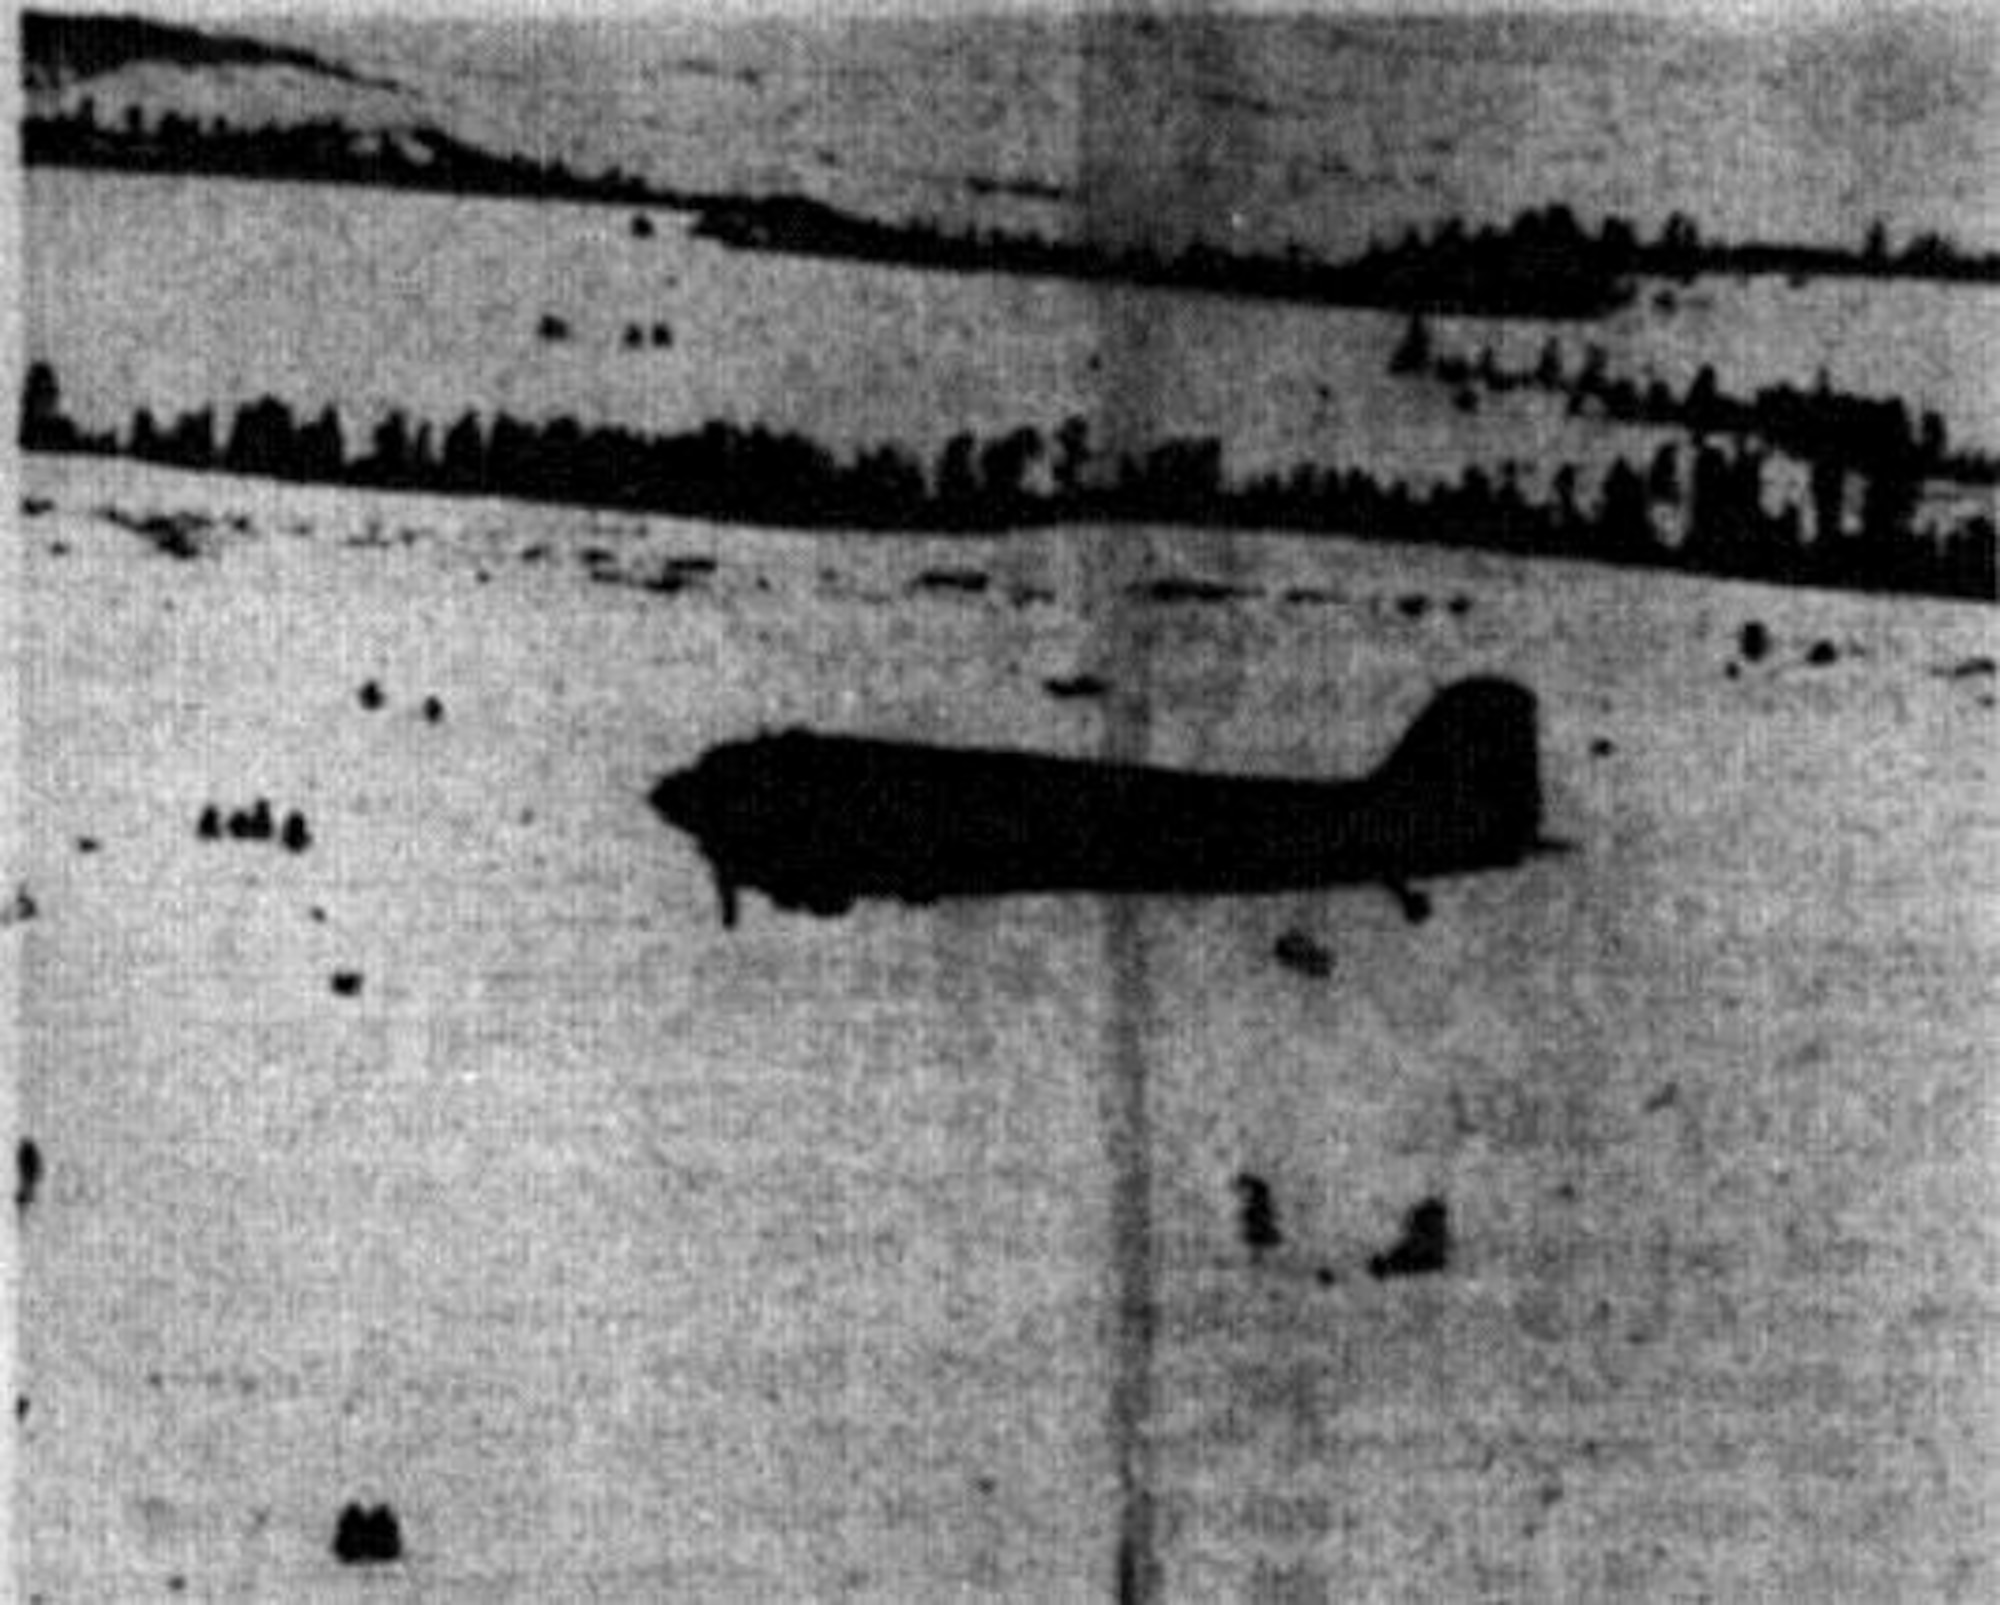 A haybale is dropped by an OreANG C-47 over the Starkey, Oregon area to elk and deer herds. (Photo by John McKean, courtesy La Grande Observer, via Eastern Oregon University Library)